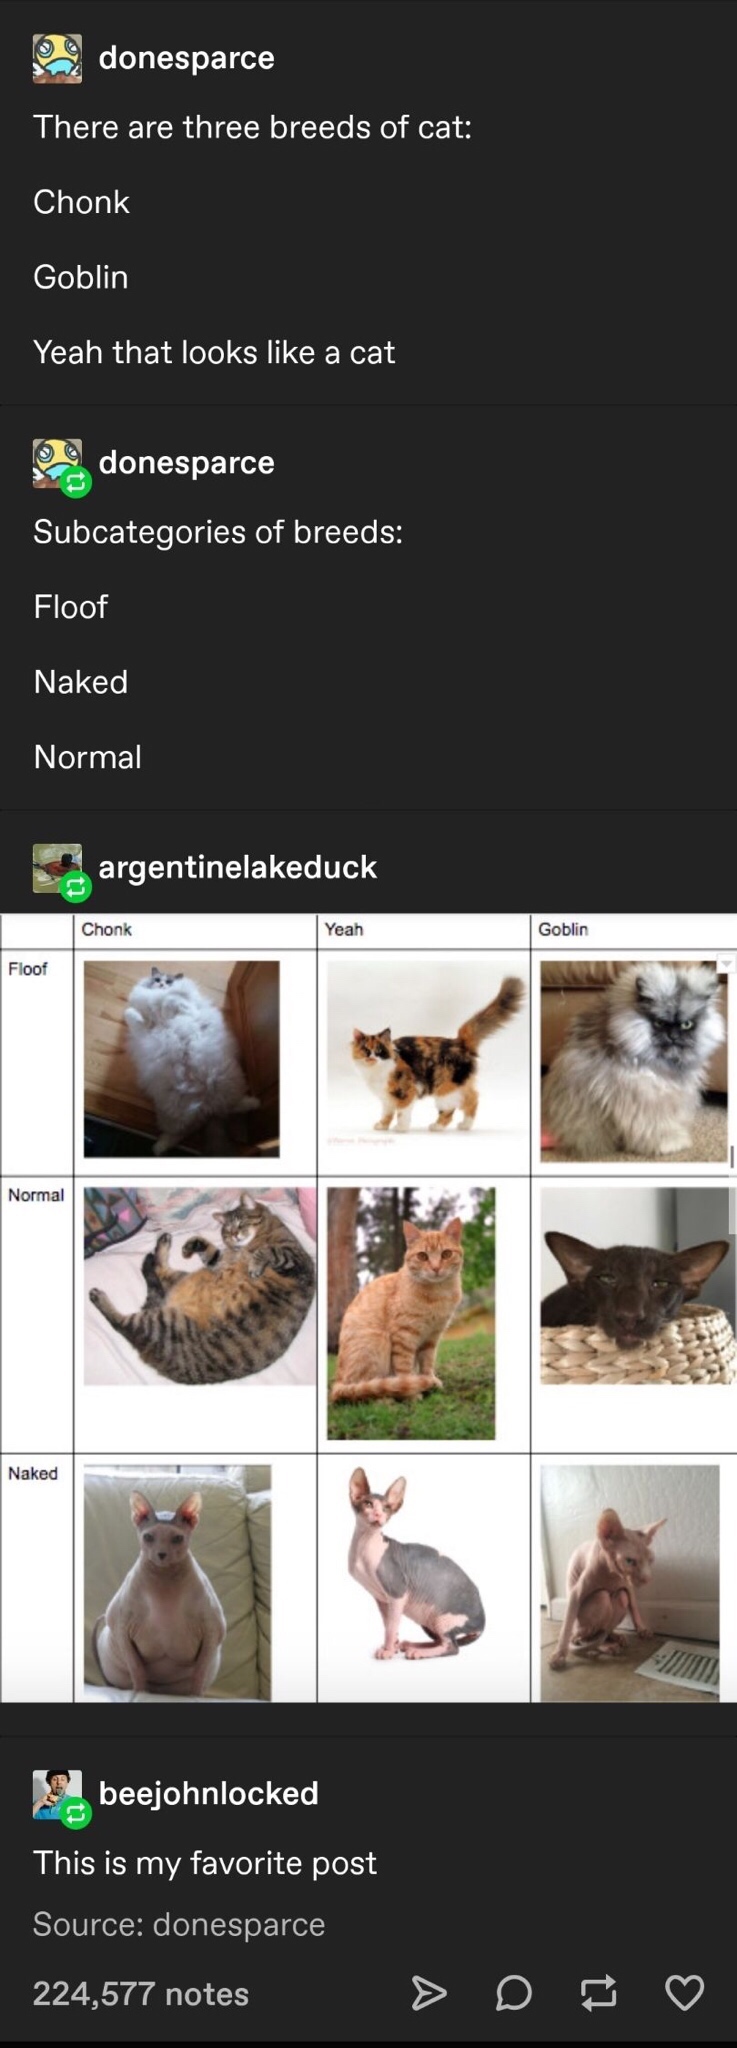 chonk yeah goblin - donesparce There are three breeds of cat Chonk Goblin Yeah that looks a cat donesparce Subcategories of breeds Floof Naked Normal argentinelakeduck Chonk Yeah Goblin Floof Normal Naked F. beejohnlocked This is my favorite post Source d